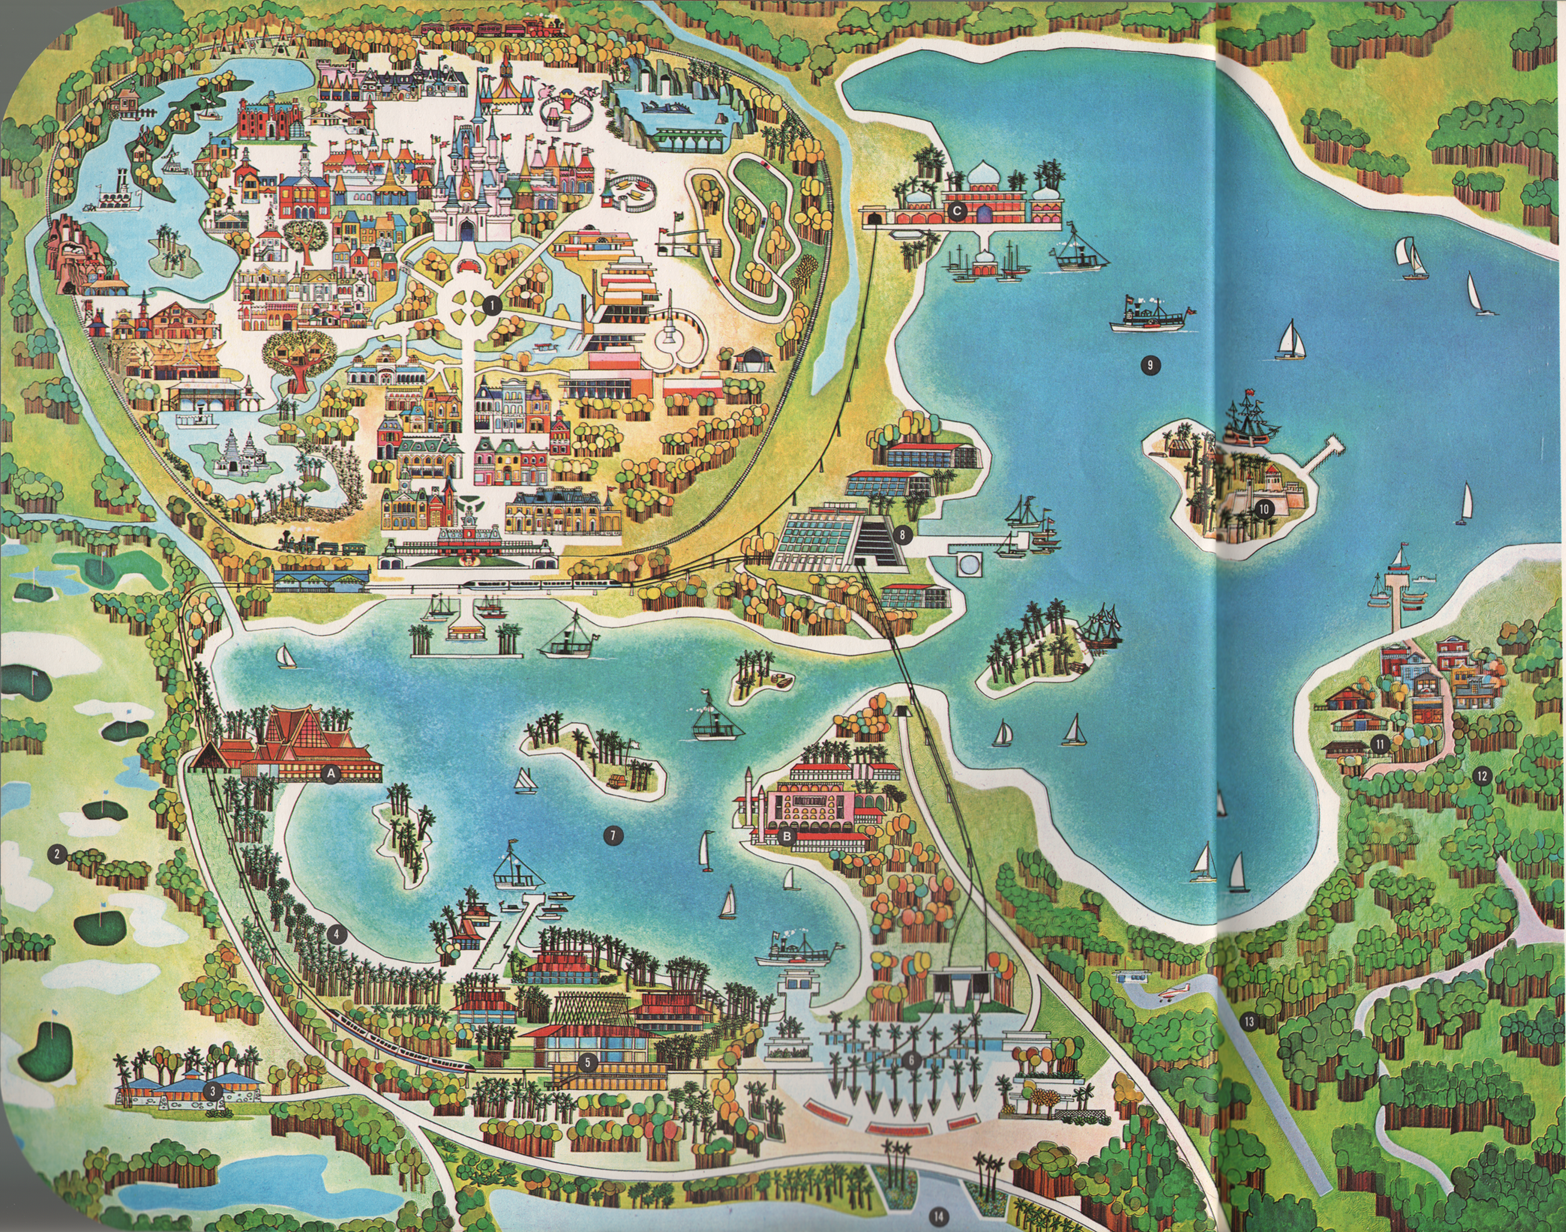 map_the-story-of-walt-disney-world-1971-version-small.png